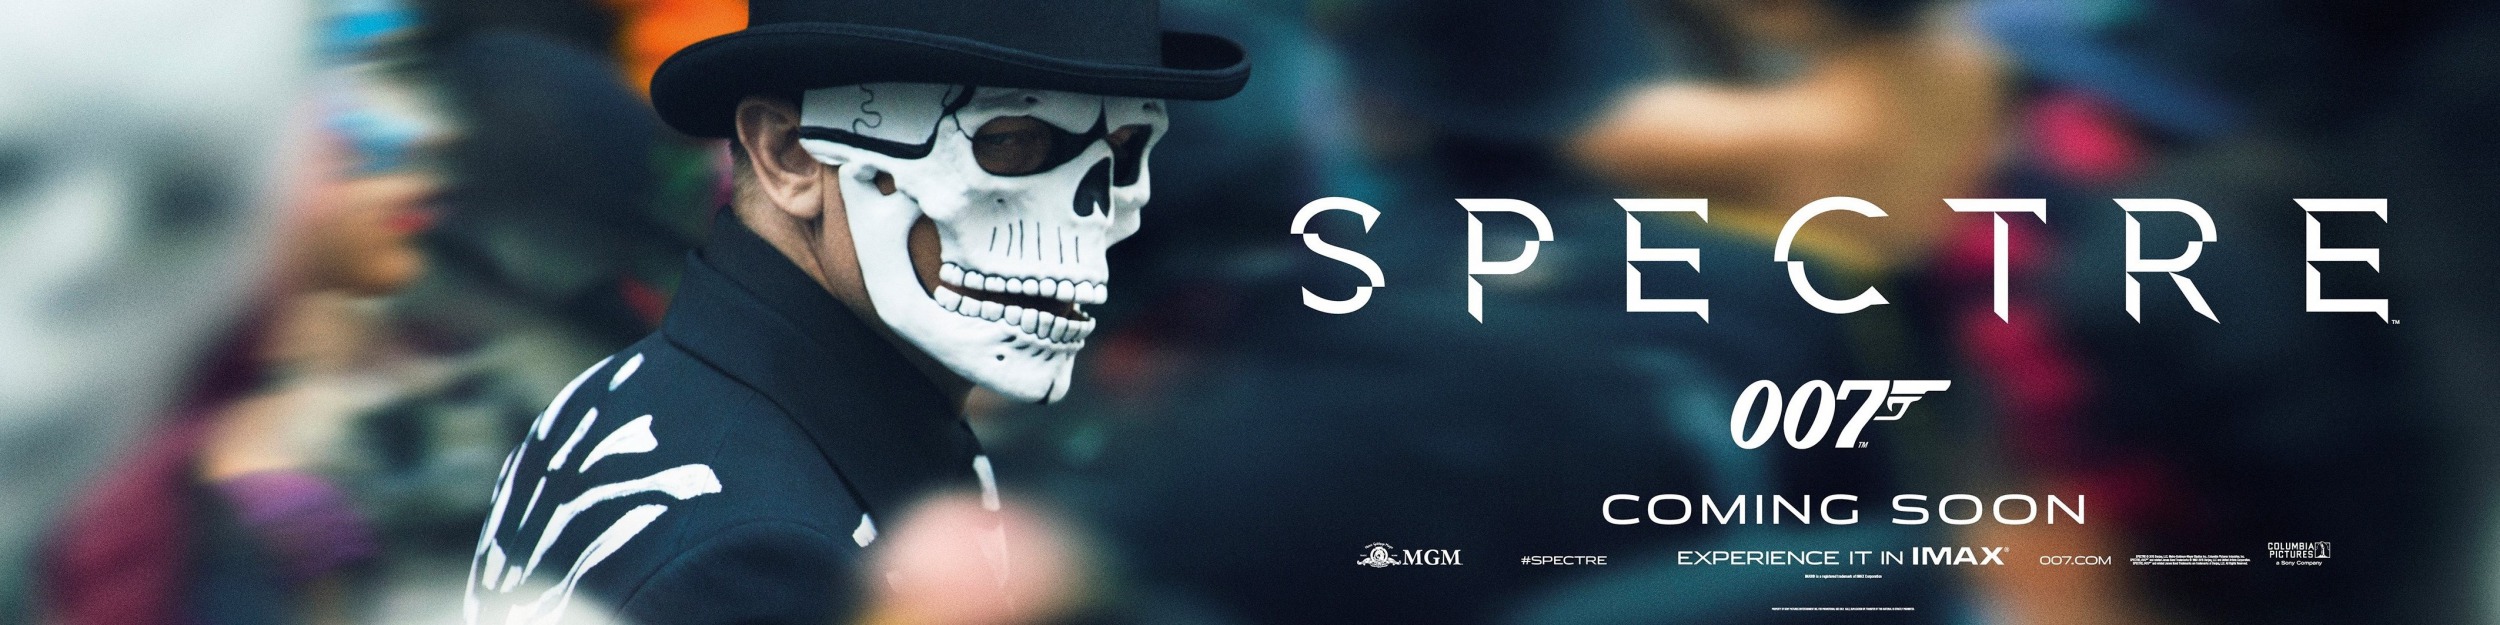 Mega Sized Movie Poster Image for Spectre (#7 of 19)